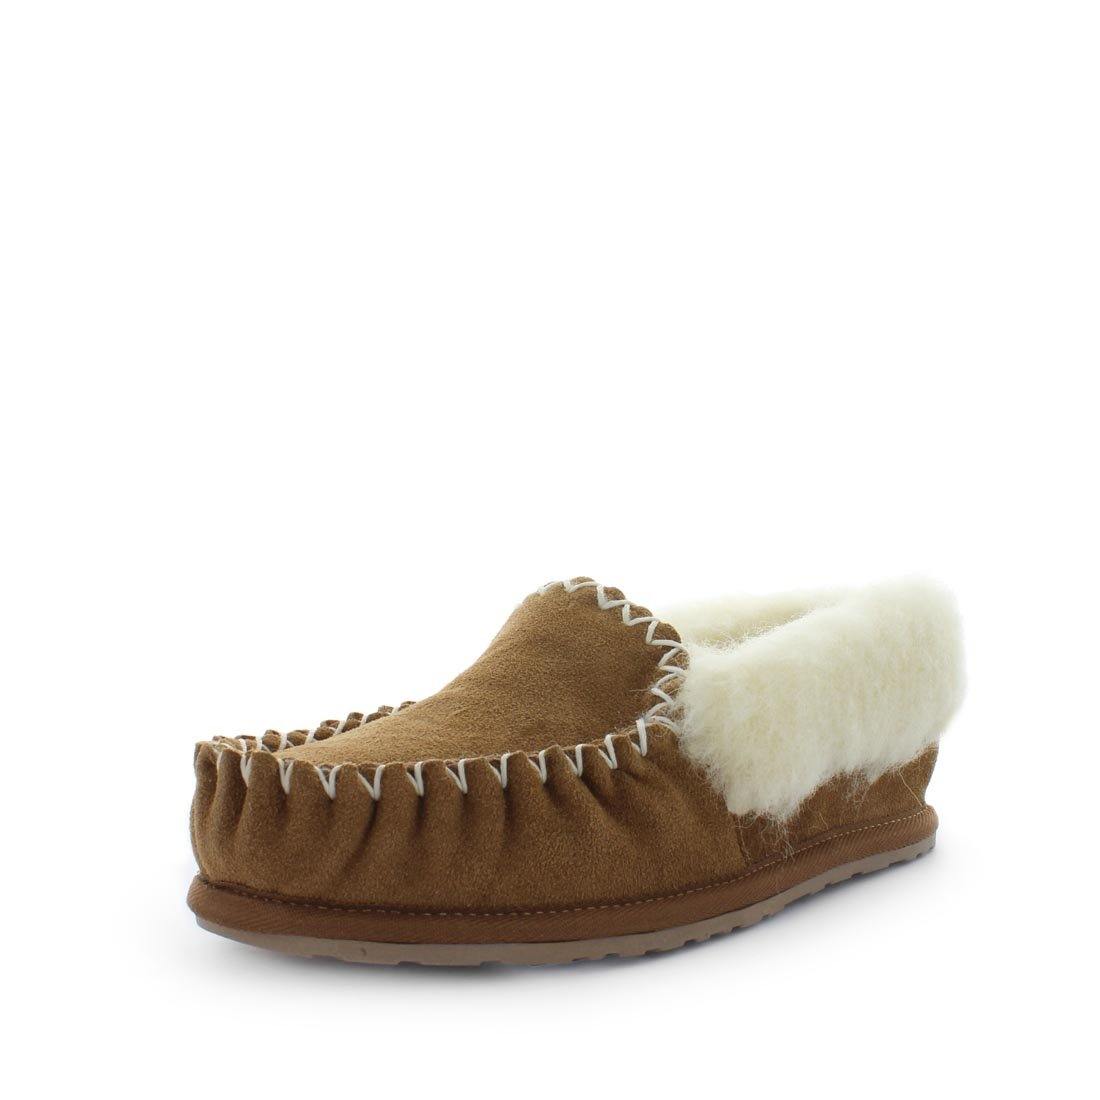 Just Bee UGGs- crafts - womens moccasins slipper style, 100% wool, leather shoe with detailed upper and over hanging wool on the trim - womens comfort slippers - womens best slippers- UGGs